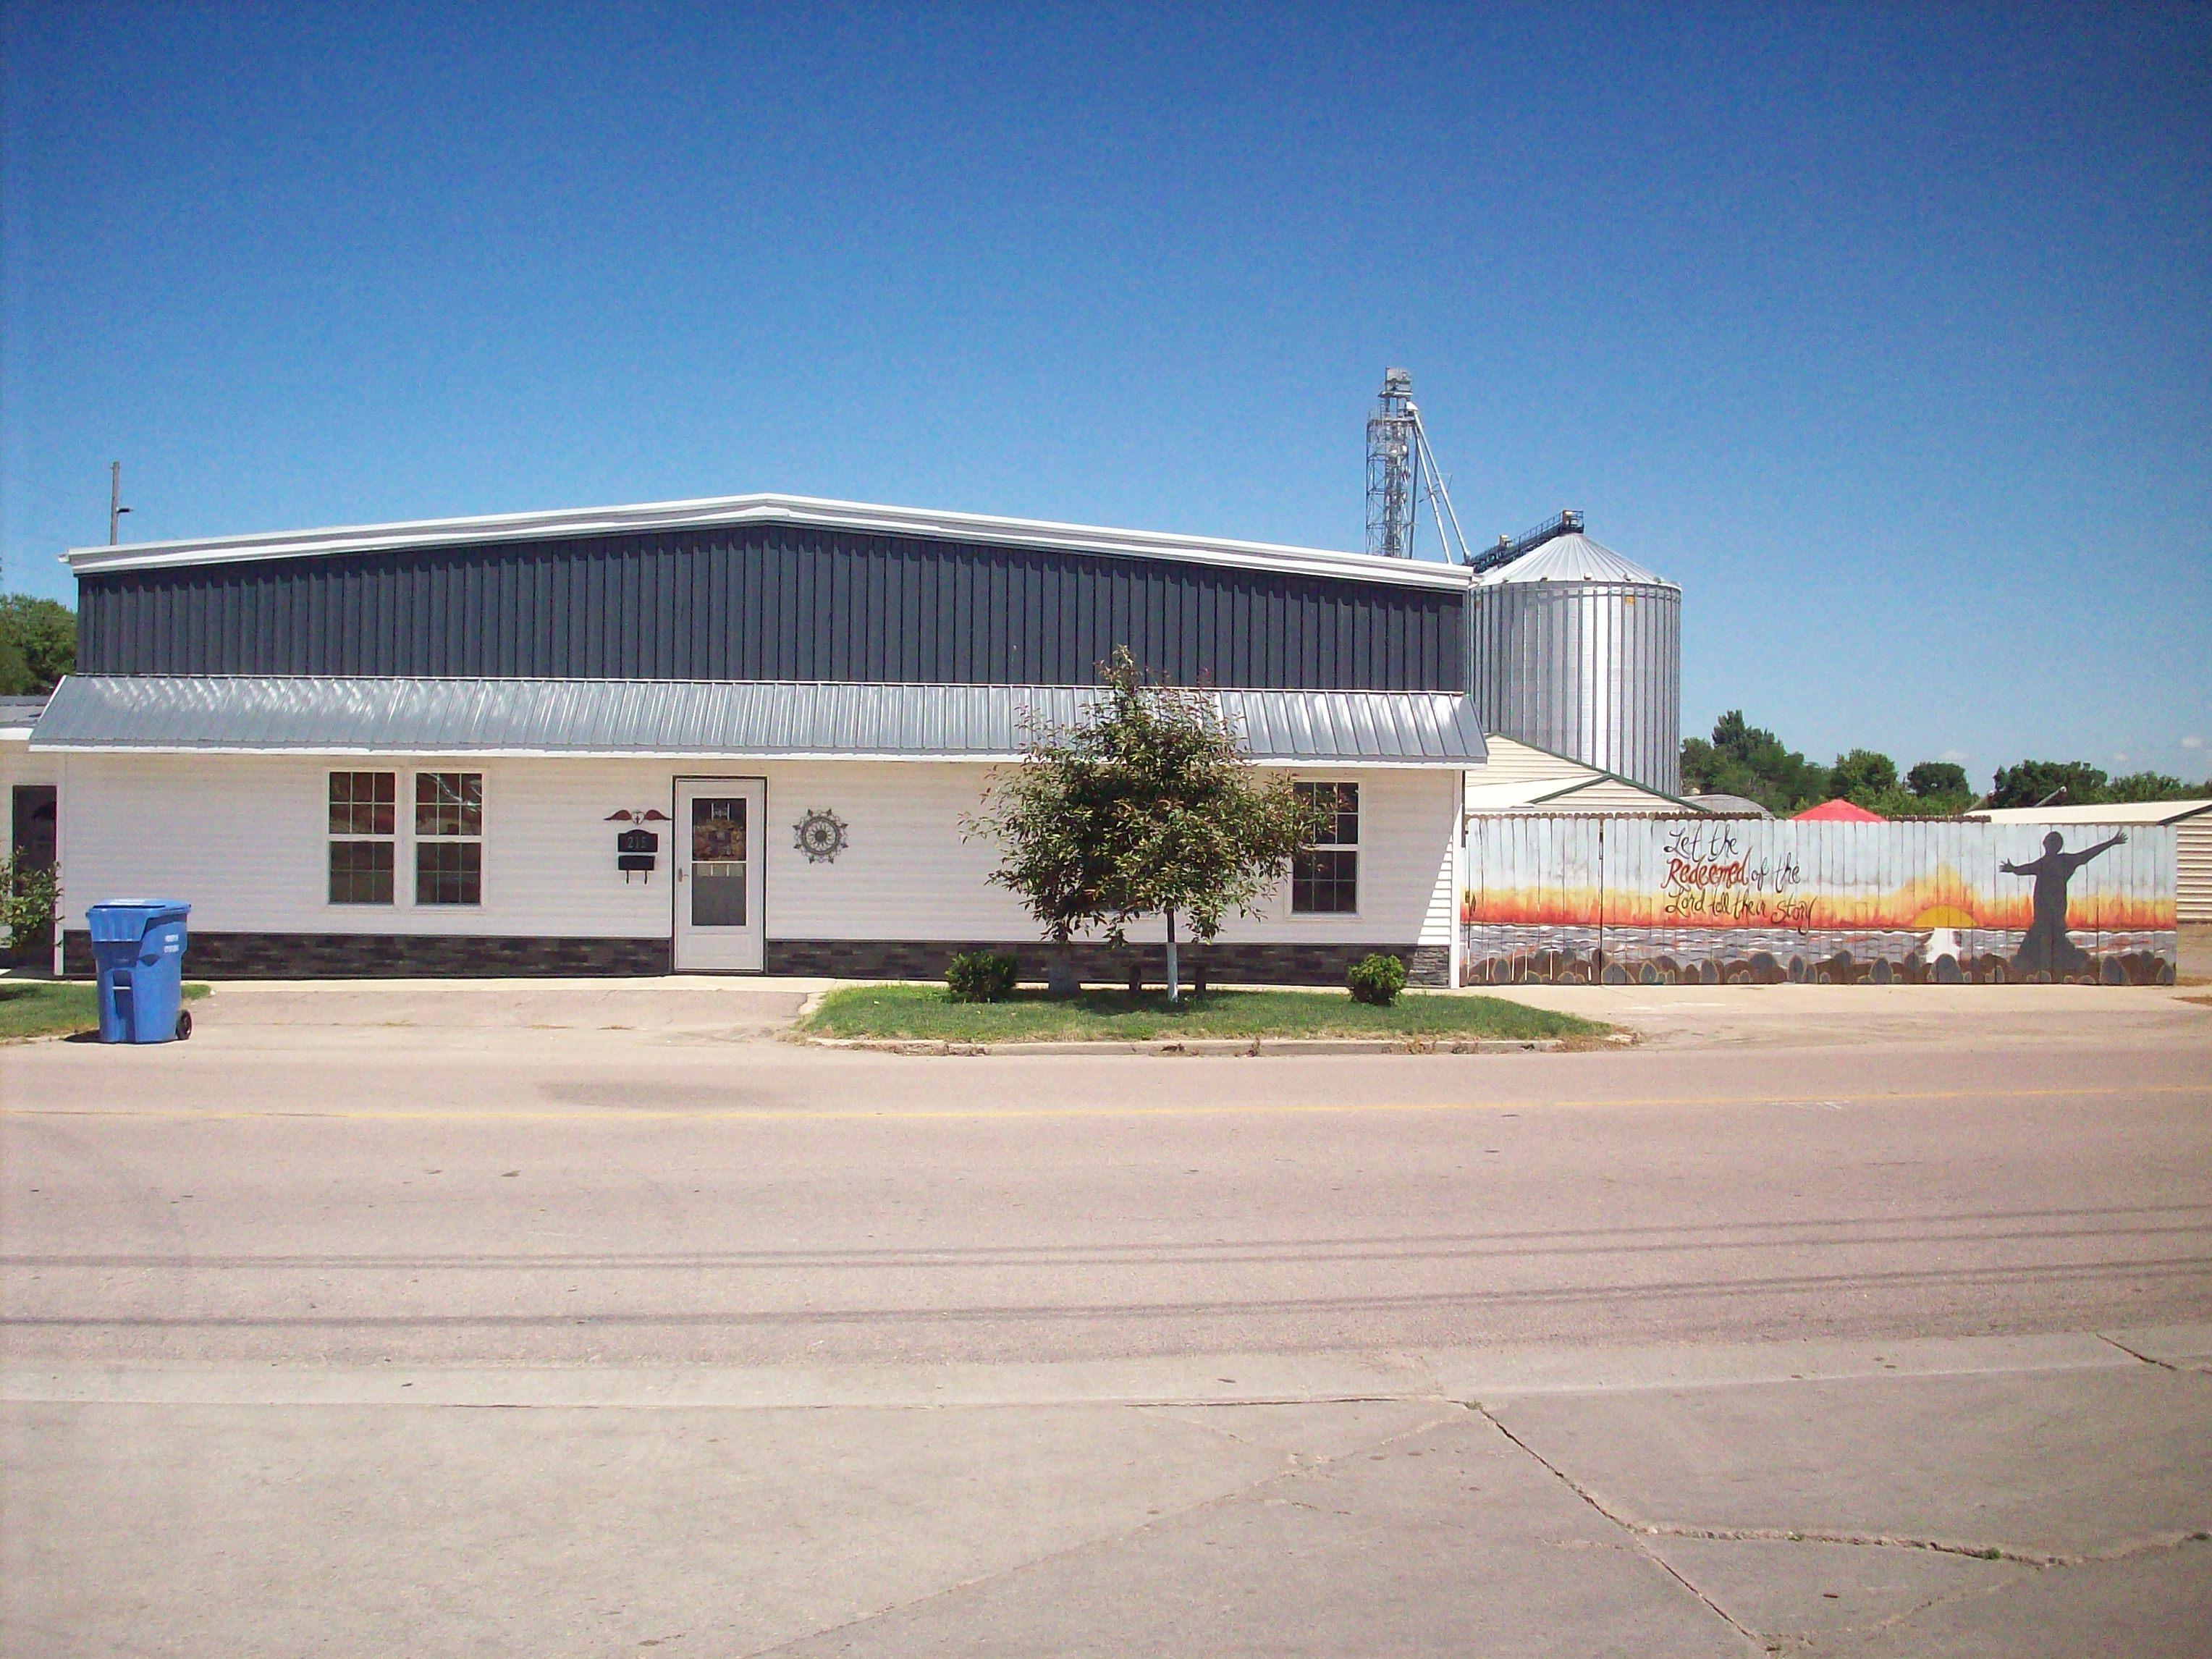 Great Business opportunity in the 'Ice Cream Capital of the World' Le Mars, IA. Call 712-540-2669.